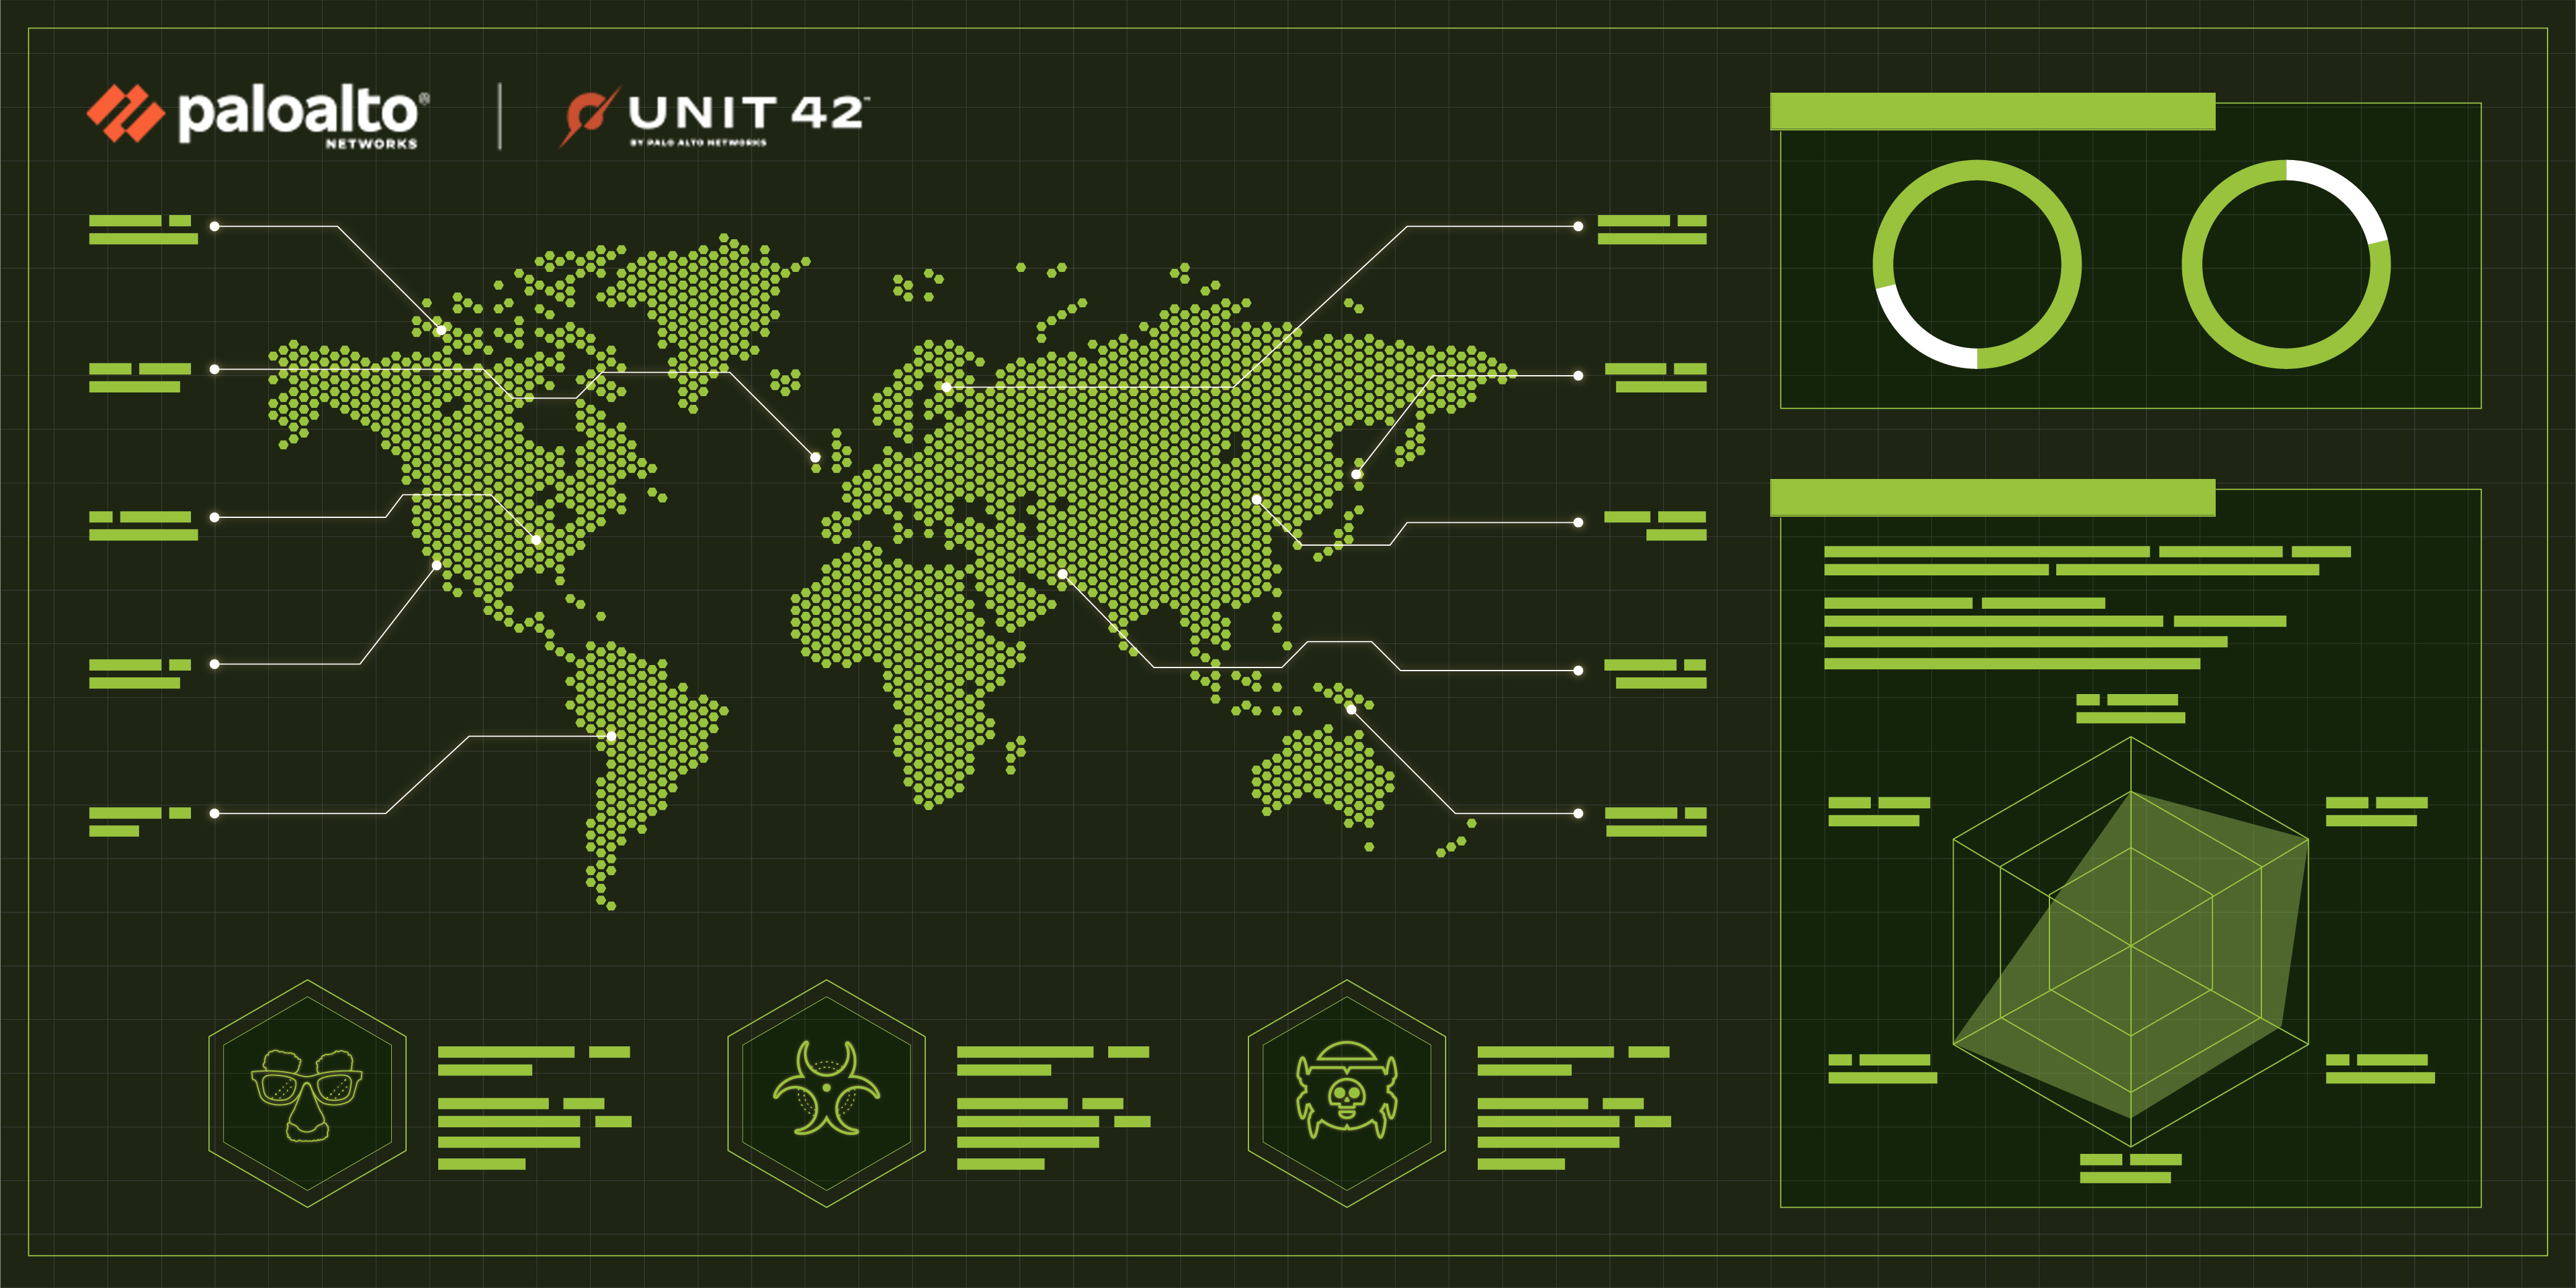 A conceptual image representing espionage and the threat groups known for it, such as Cloaked Ursa (APT29).